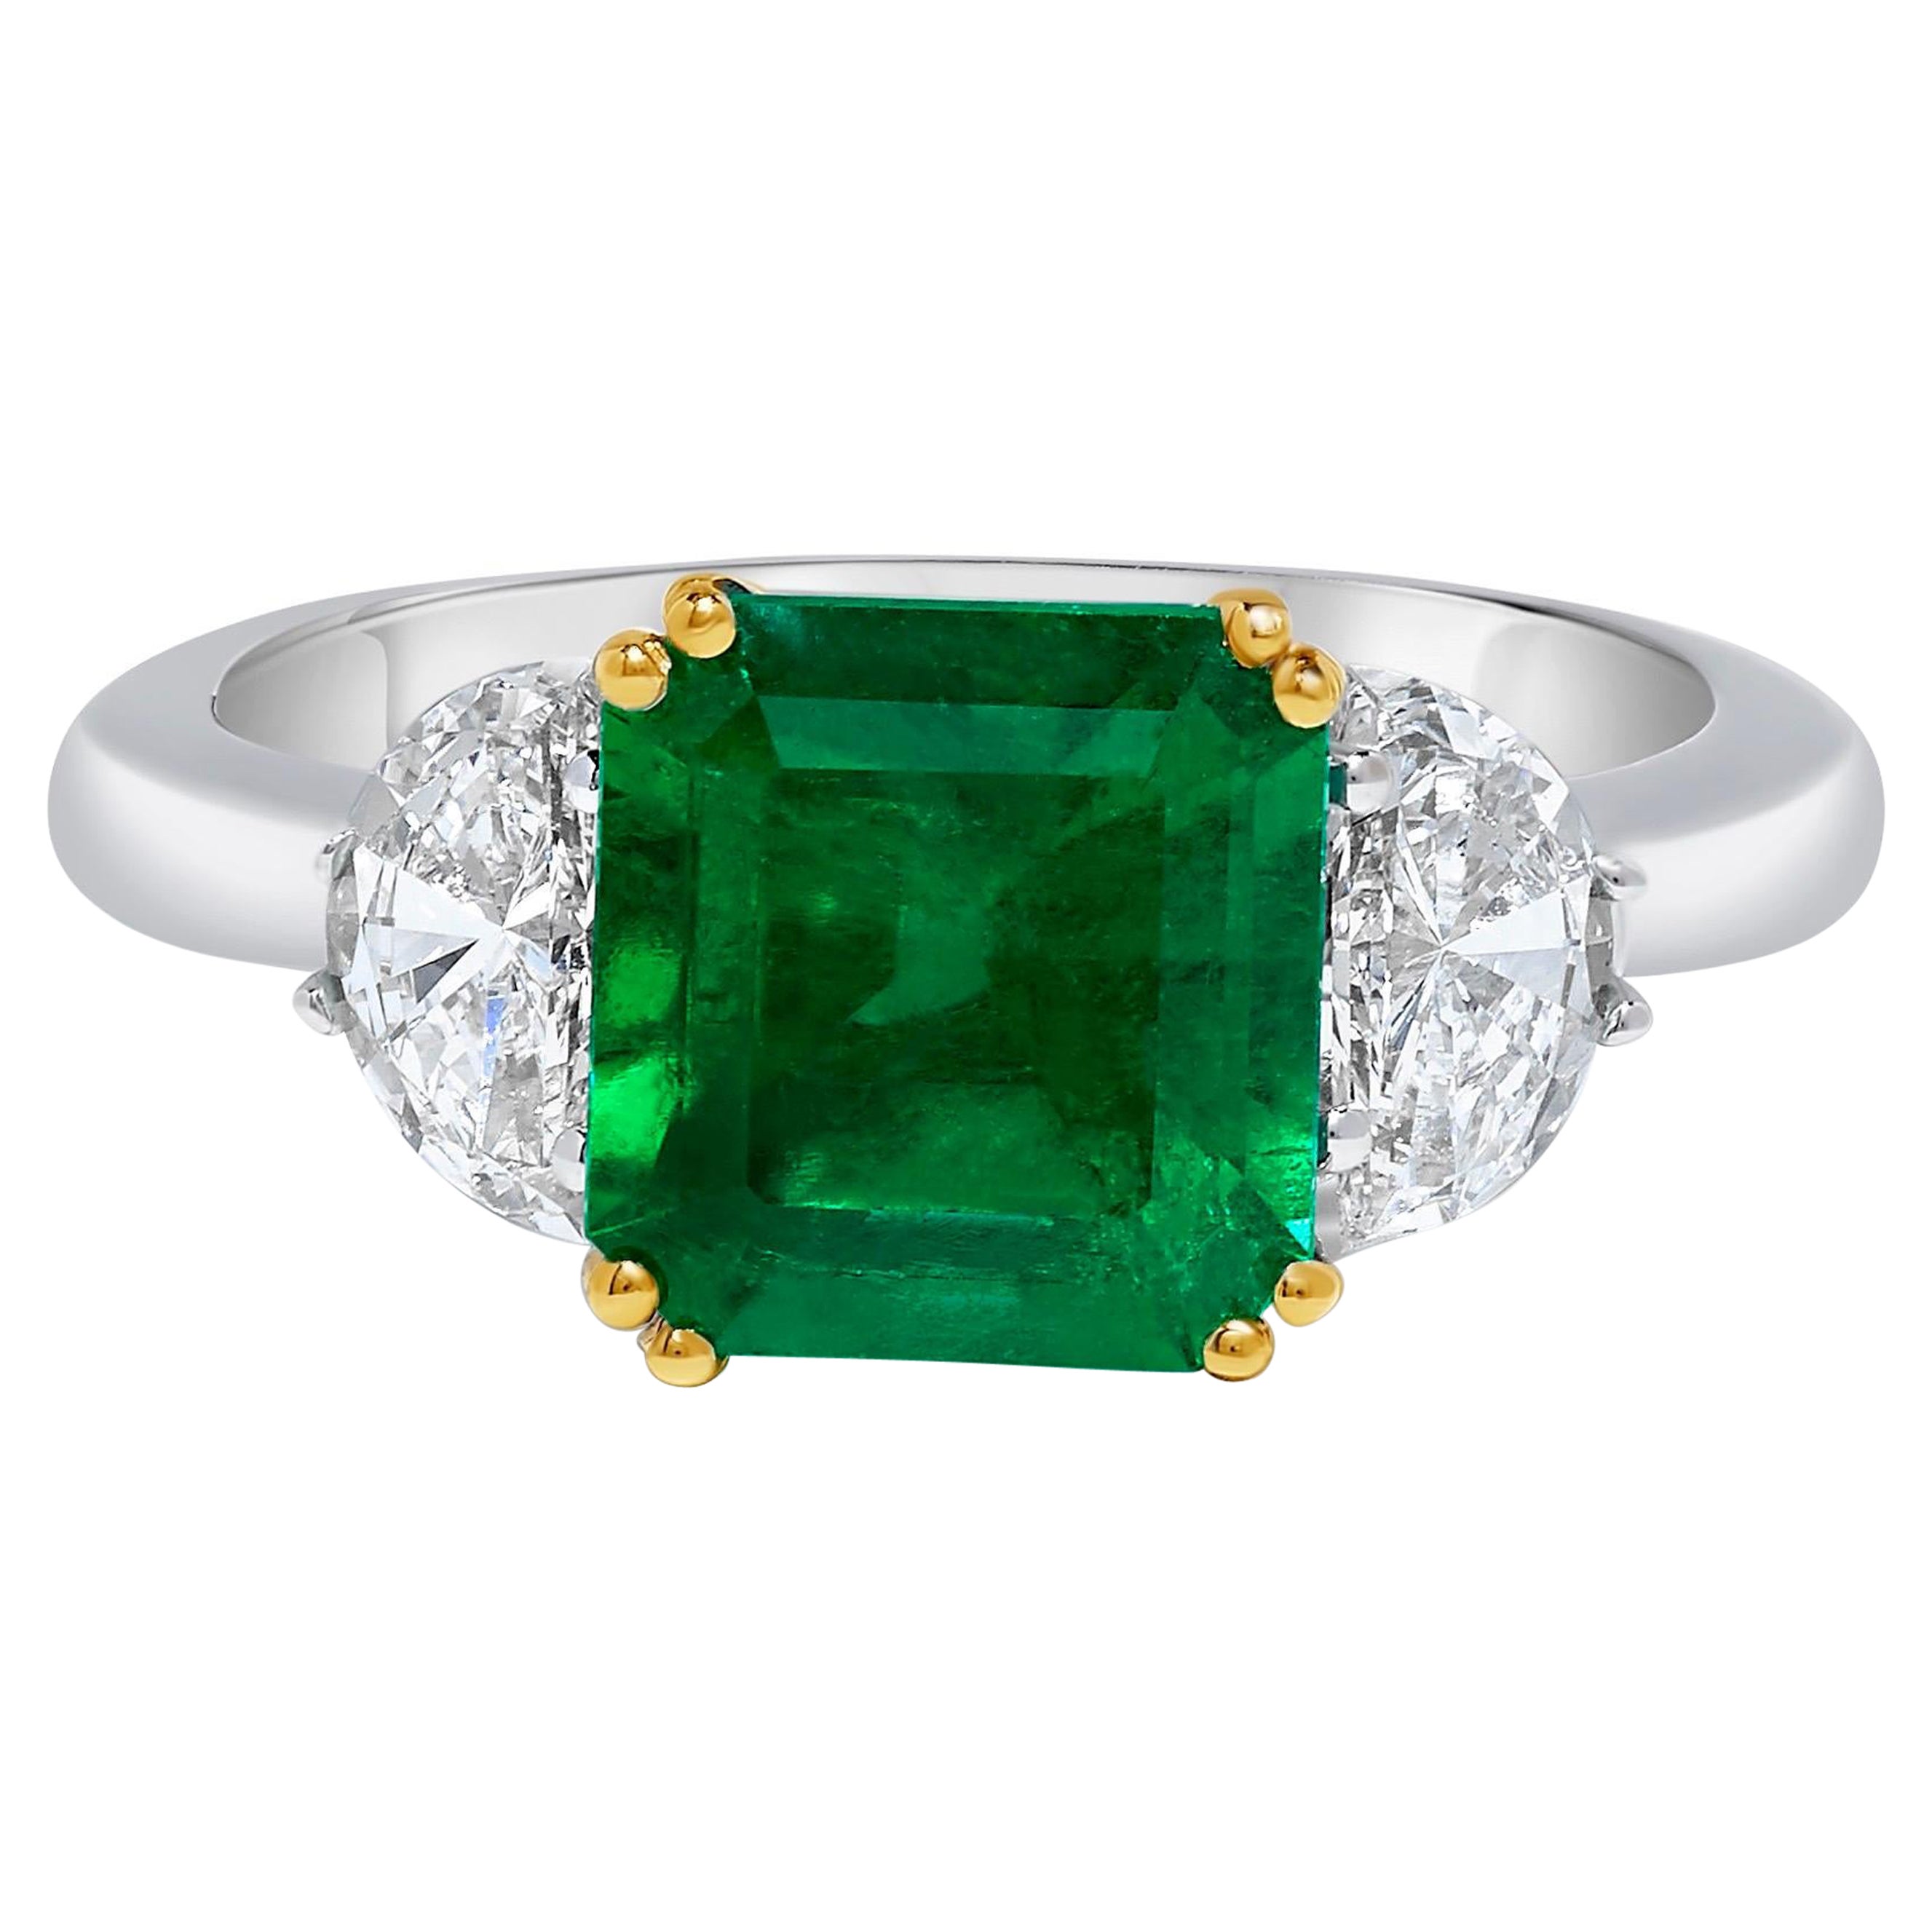 Emilio Jewelry Certified 3.69 Carat Colombian Emerald Ring